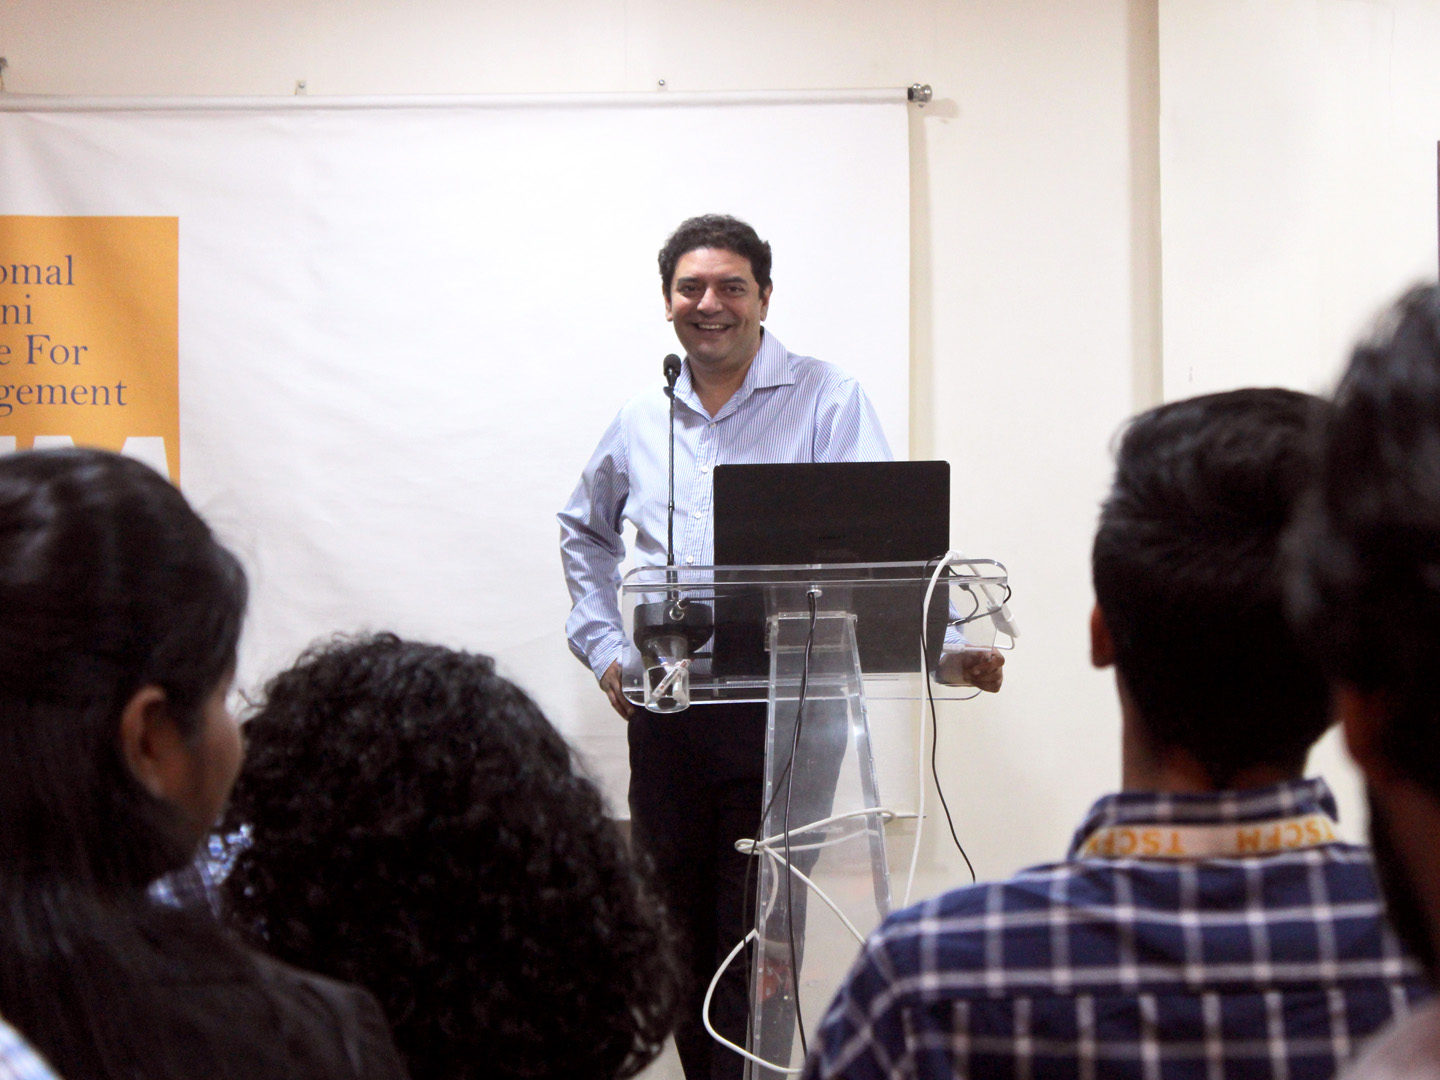 Industry Session By Mr. Nirav Choksi, Co-Founder and Chief Executive Officer - CredAble